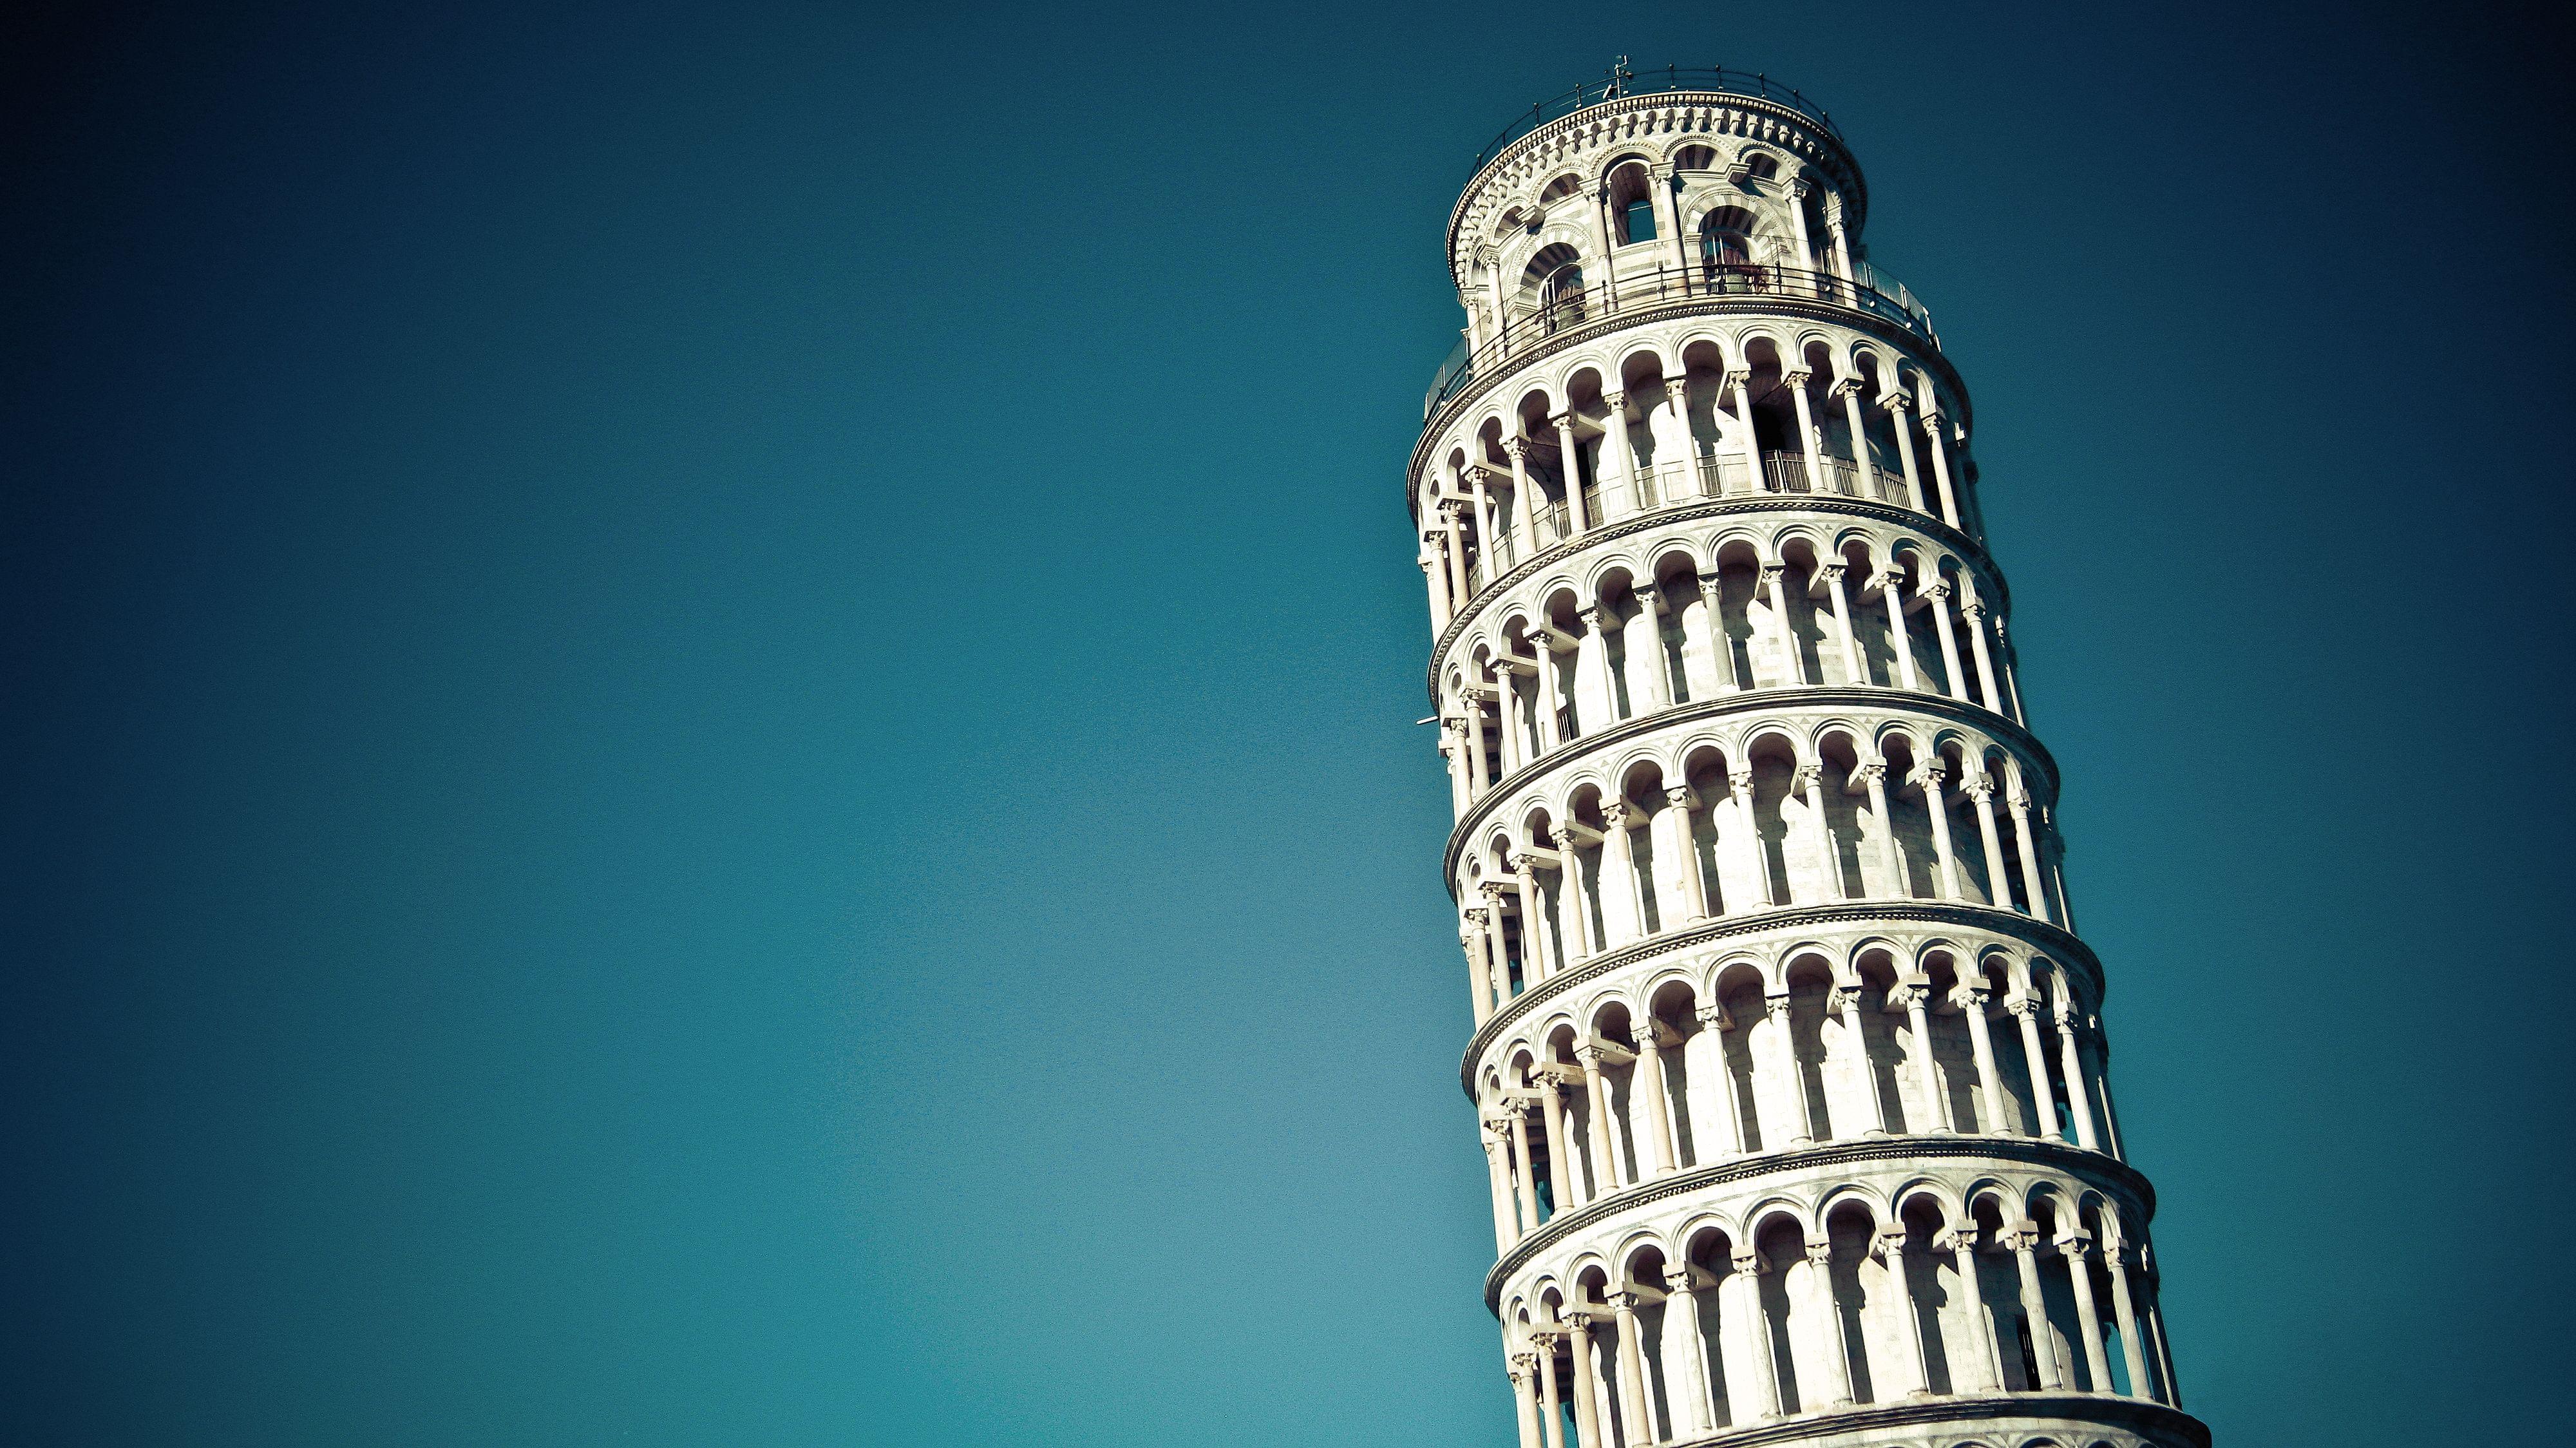 Fall of Leaning Tower of Pisa